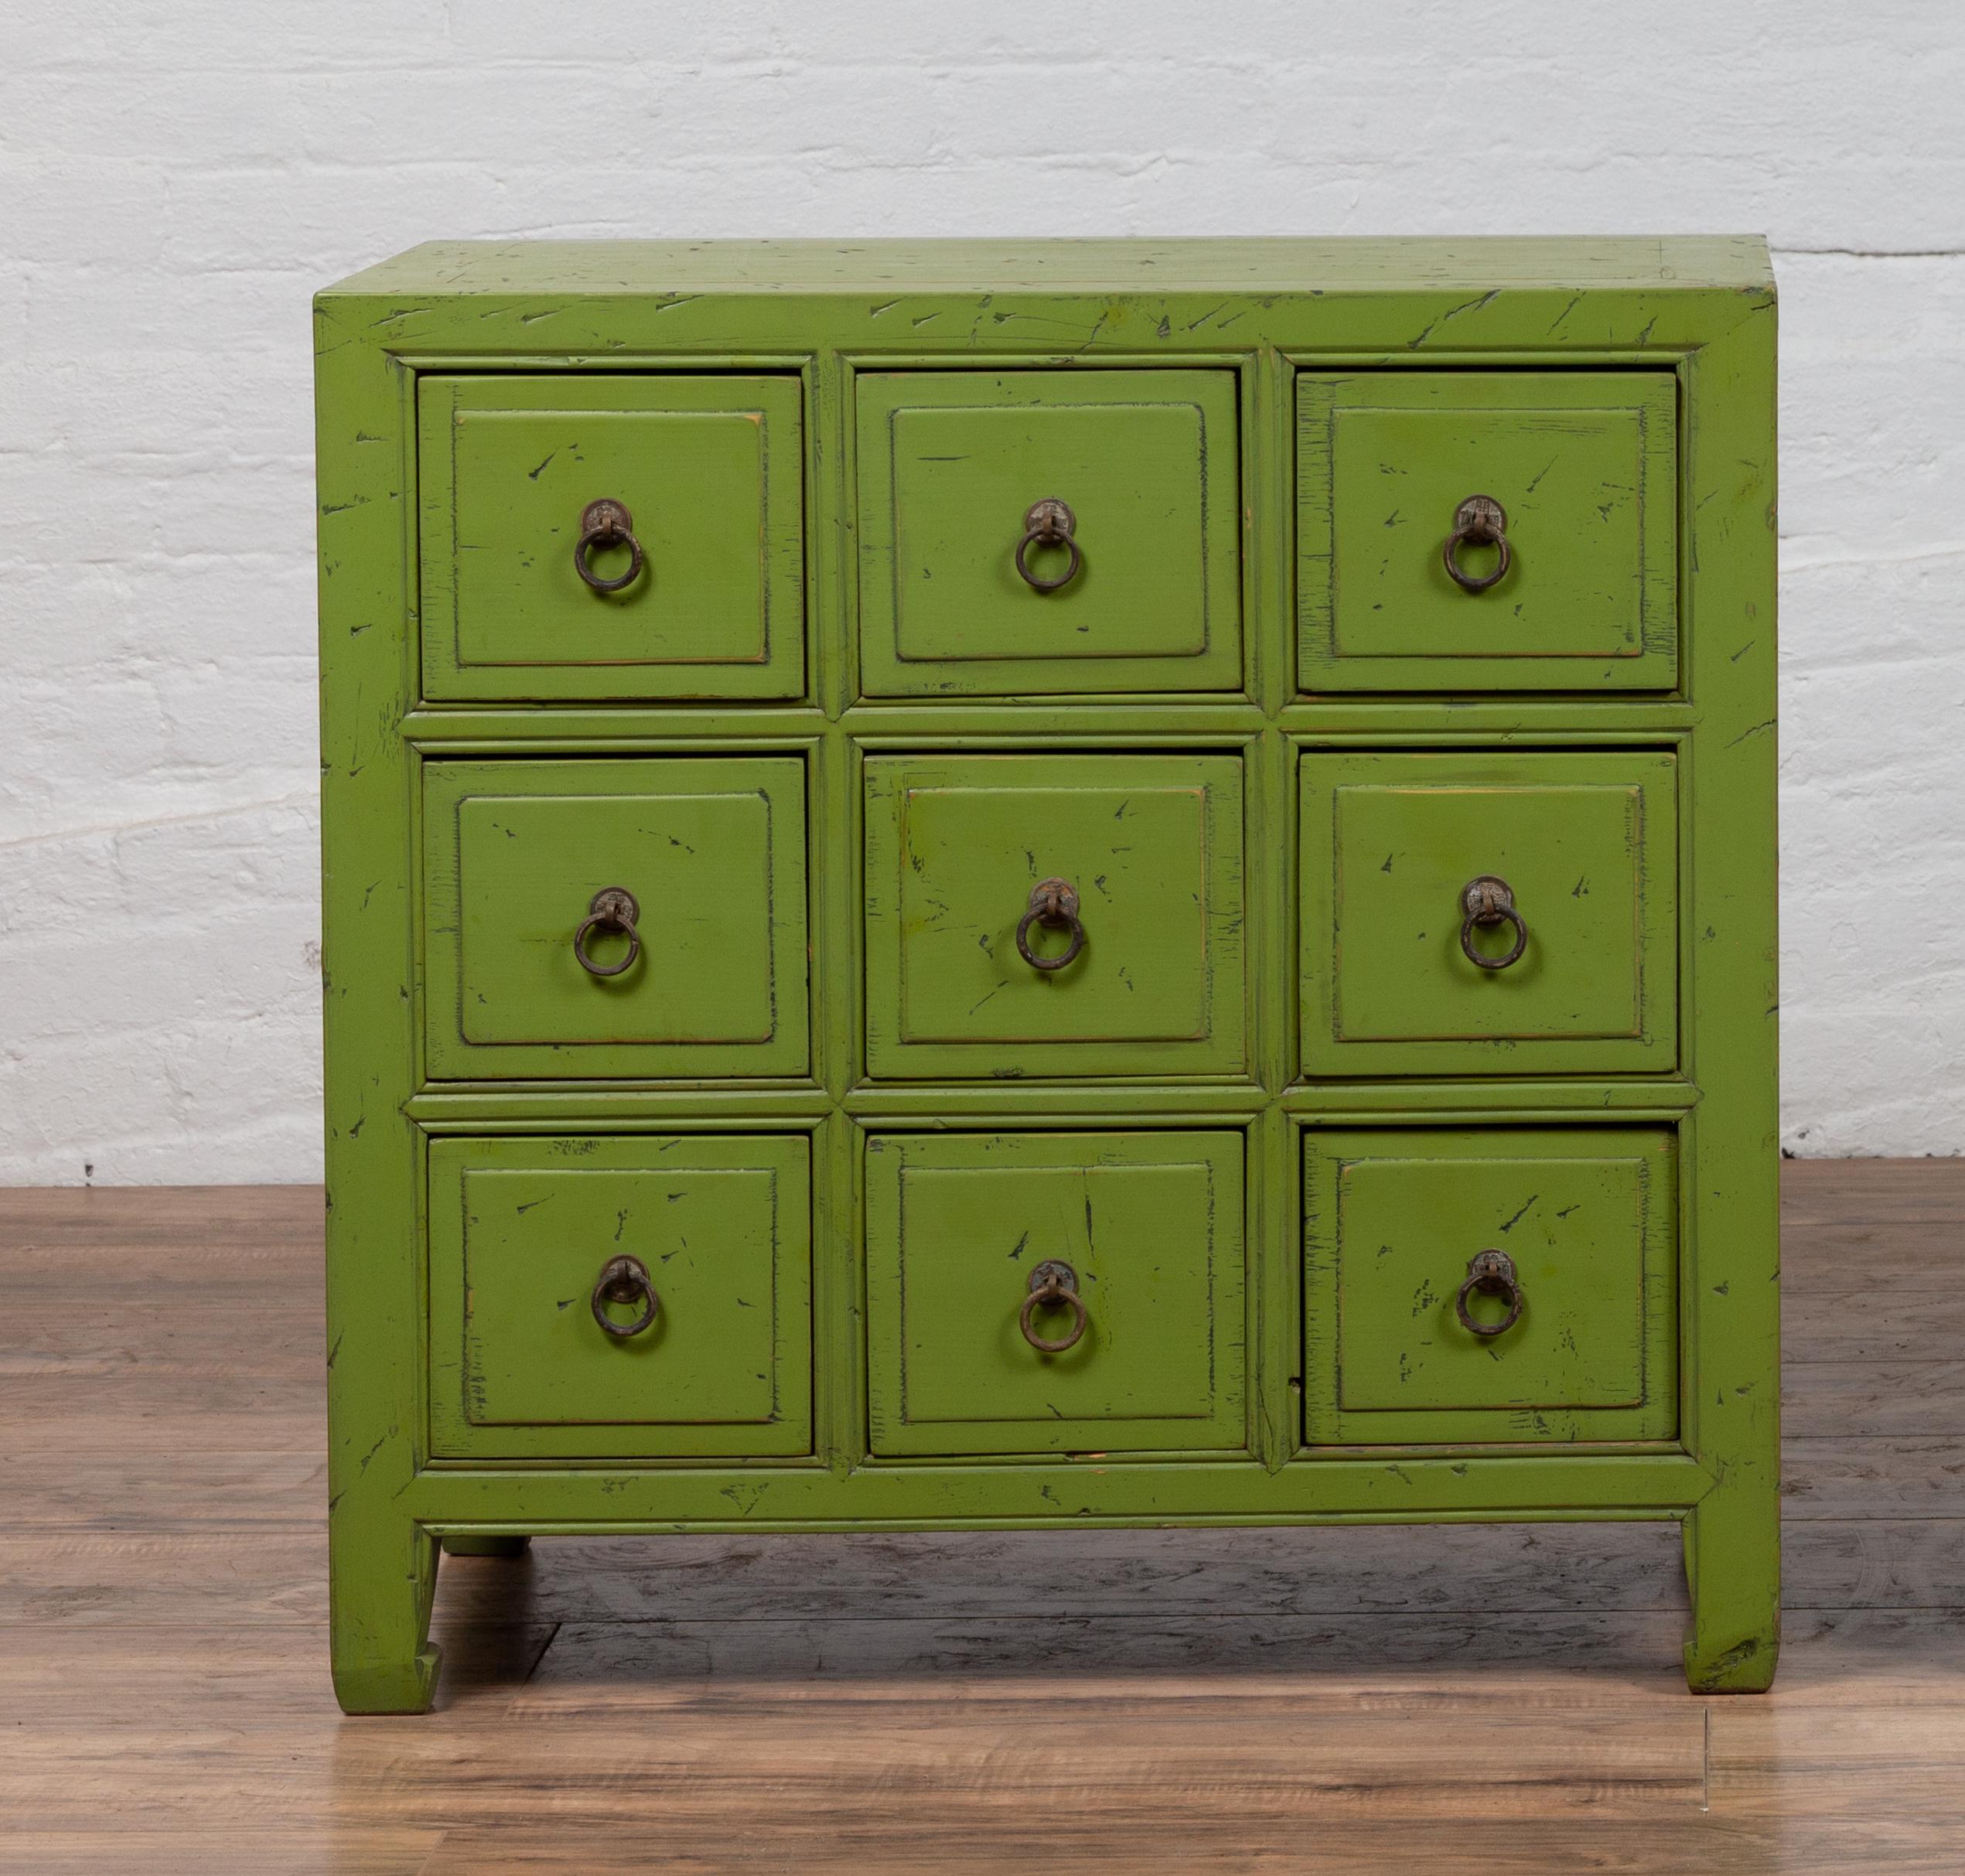 A Chinese vintage green painted nine-drawer apothecary bedside chest from the mid-20th century, with black splatter. Born in China during the midcentury period, this charming apothecary chest features a rectangular top, sitting above a perfectly